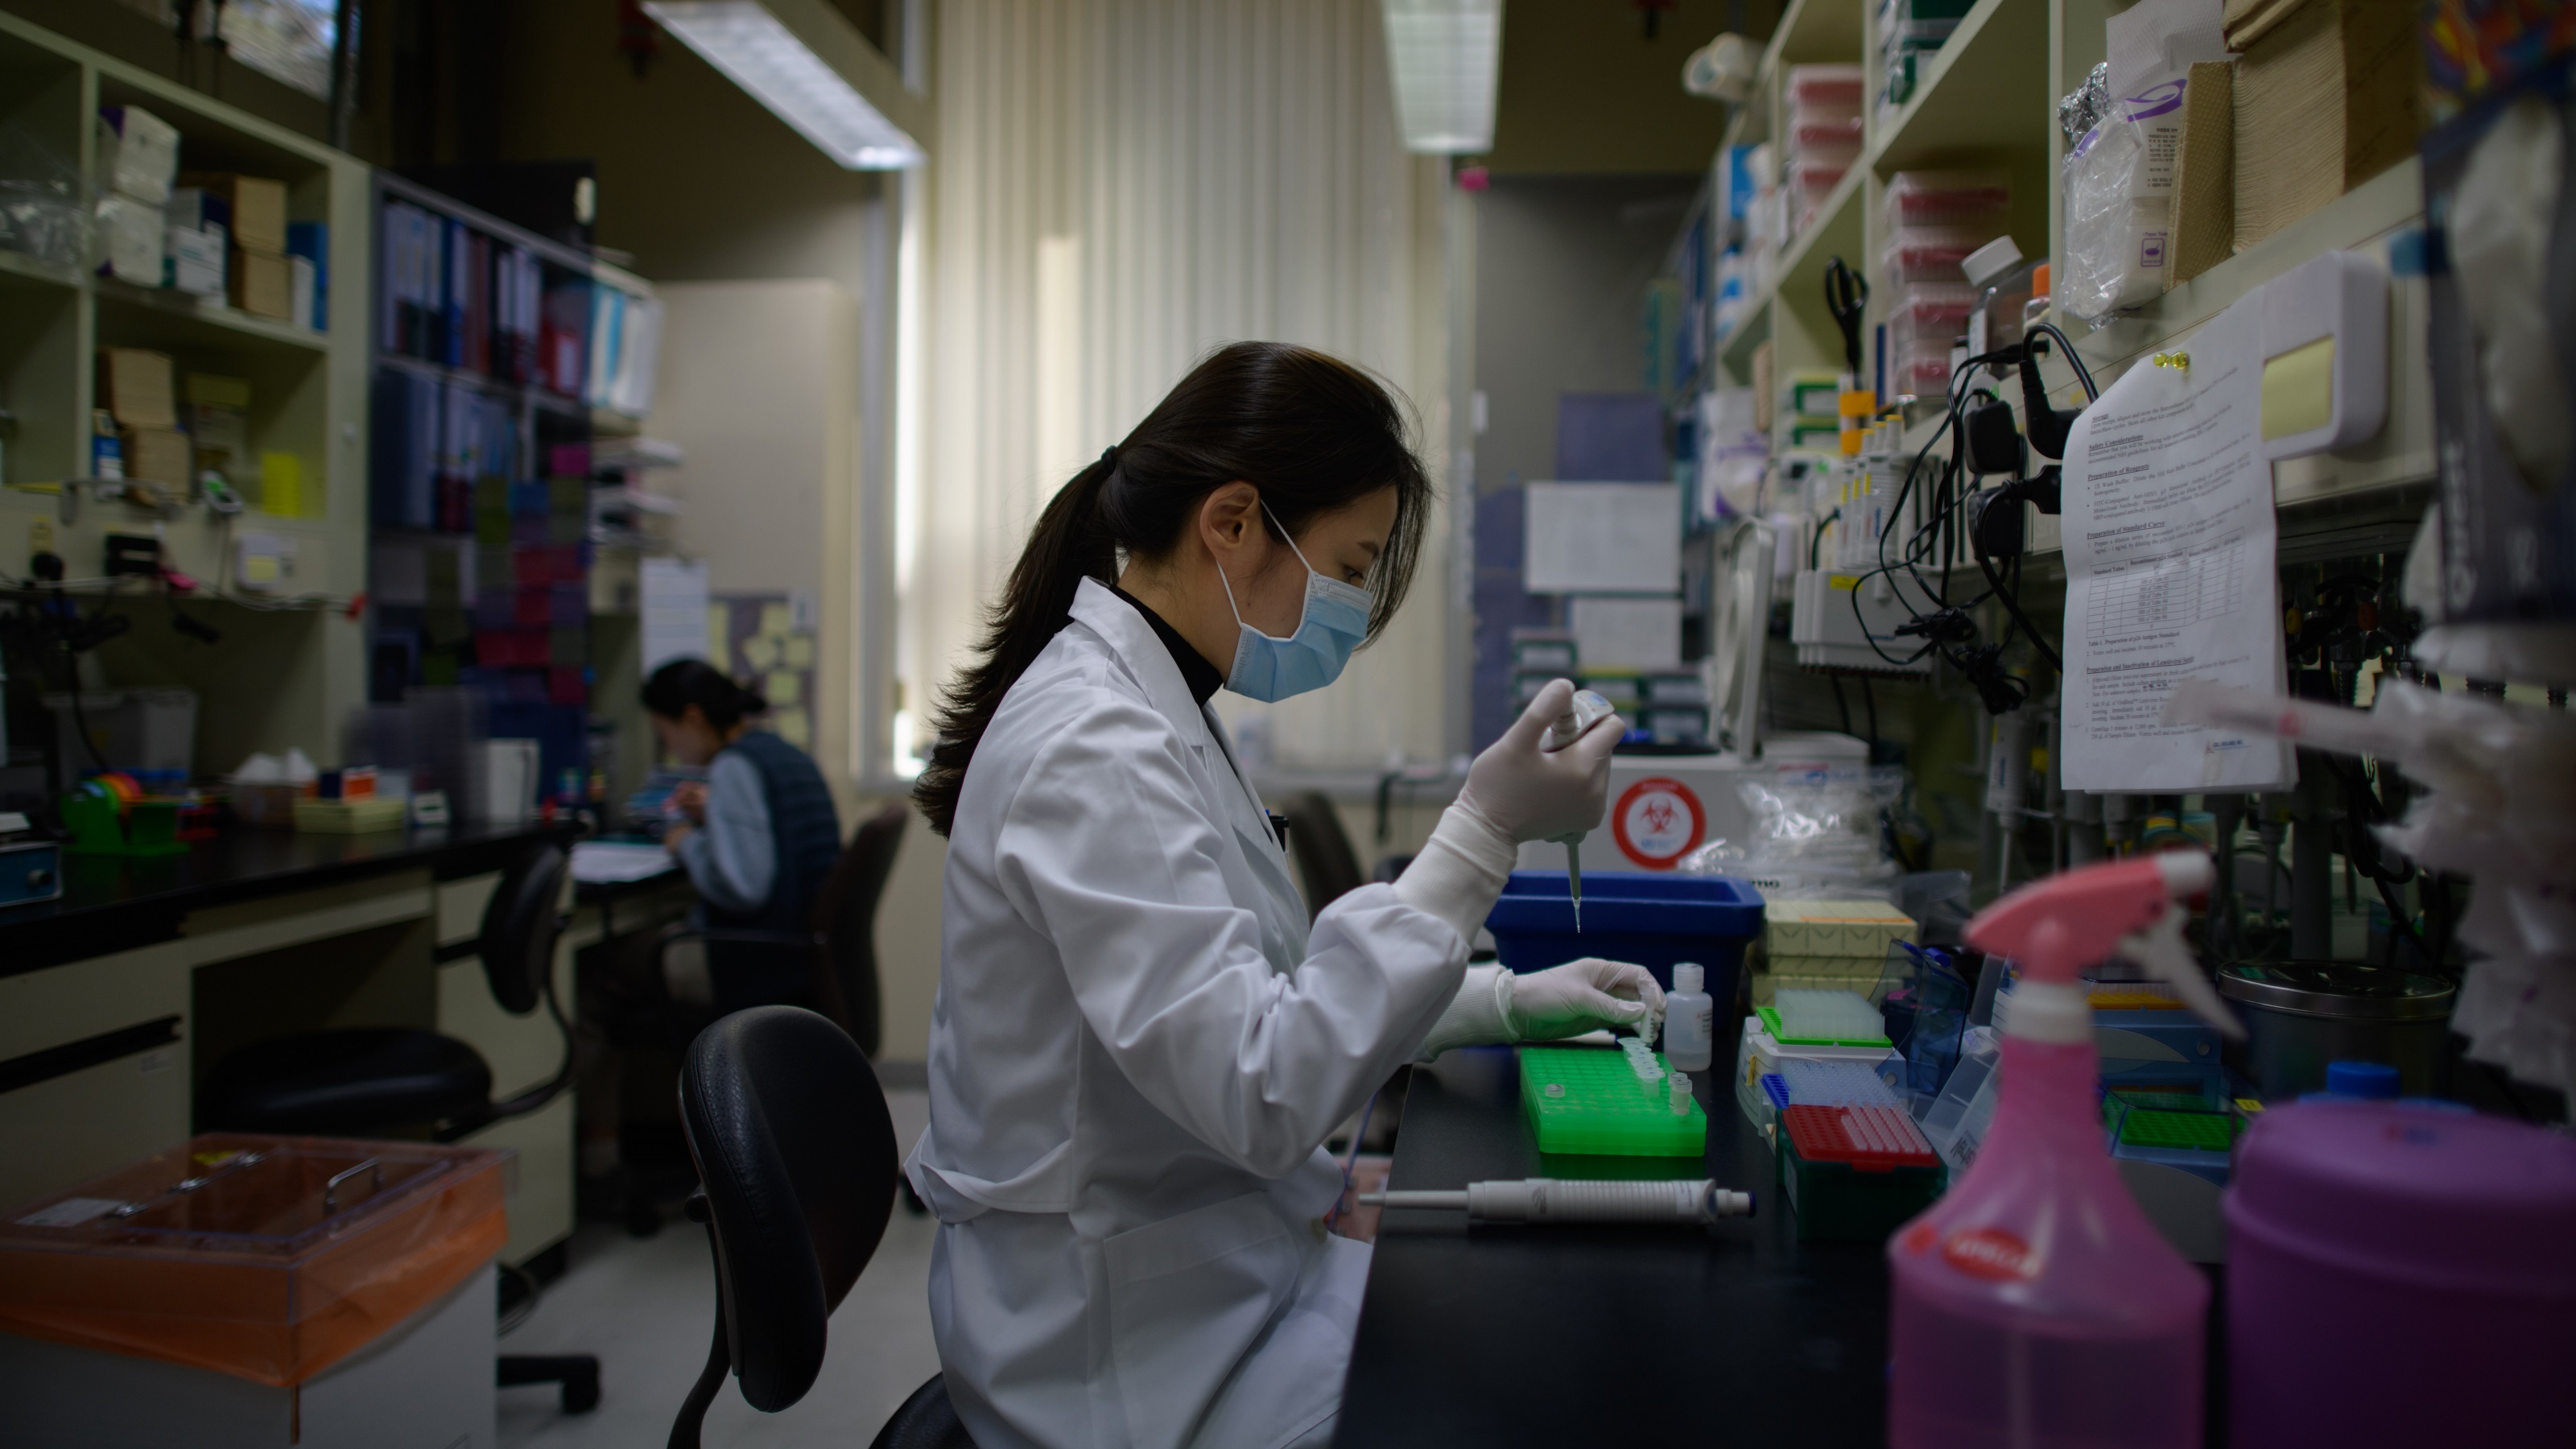 Lab technician working on a neutralising antibody test on the Middle Eastern Respiratory Syndrome (MERS) coronavirus at a Bio Safety Level (BSL) 3 laboratory at the International Vaccine Institute (IVI) in Seoul.